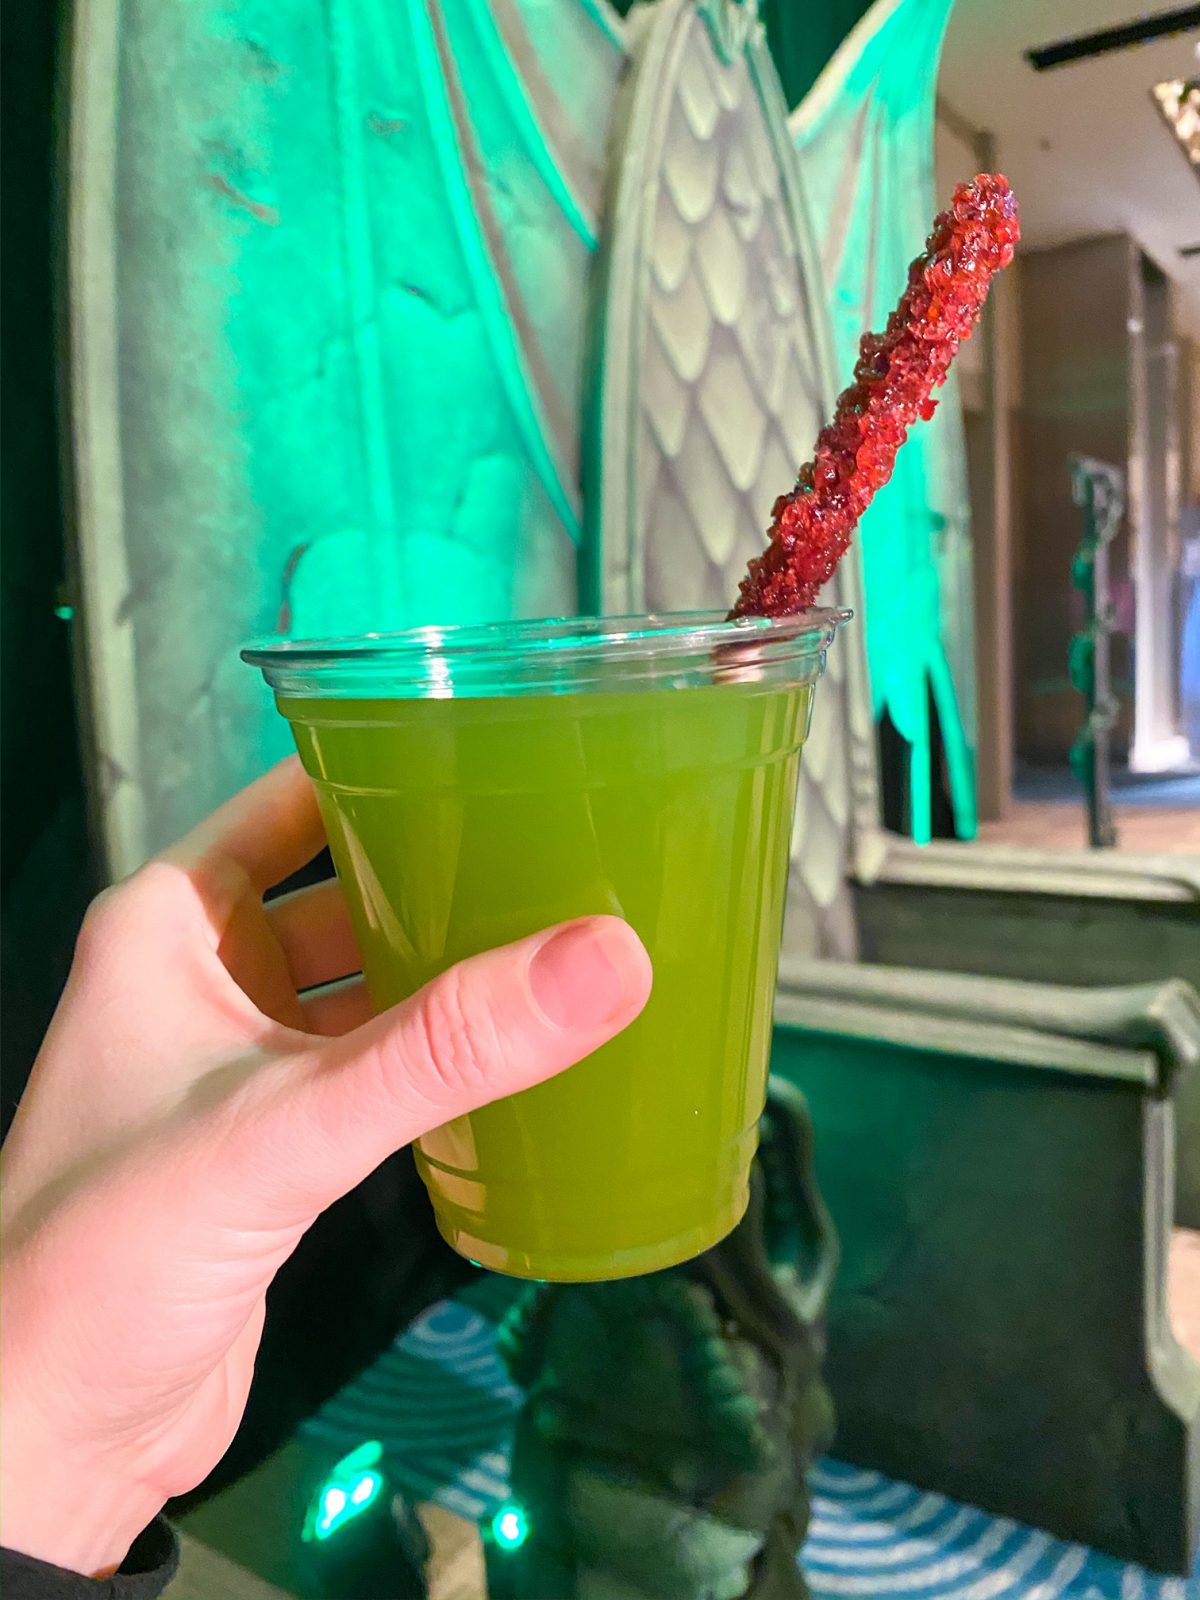 Voodoo magic drink at Villains after hours